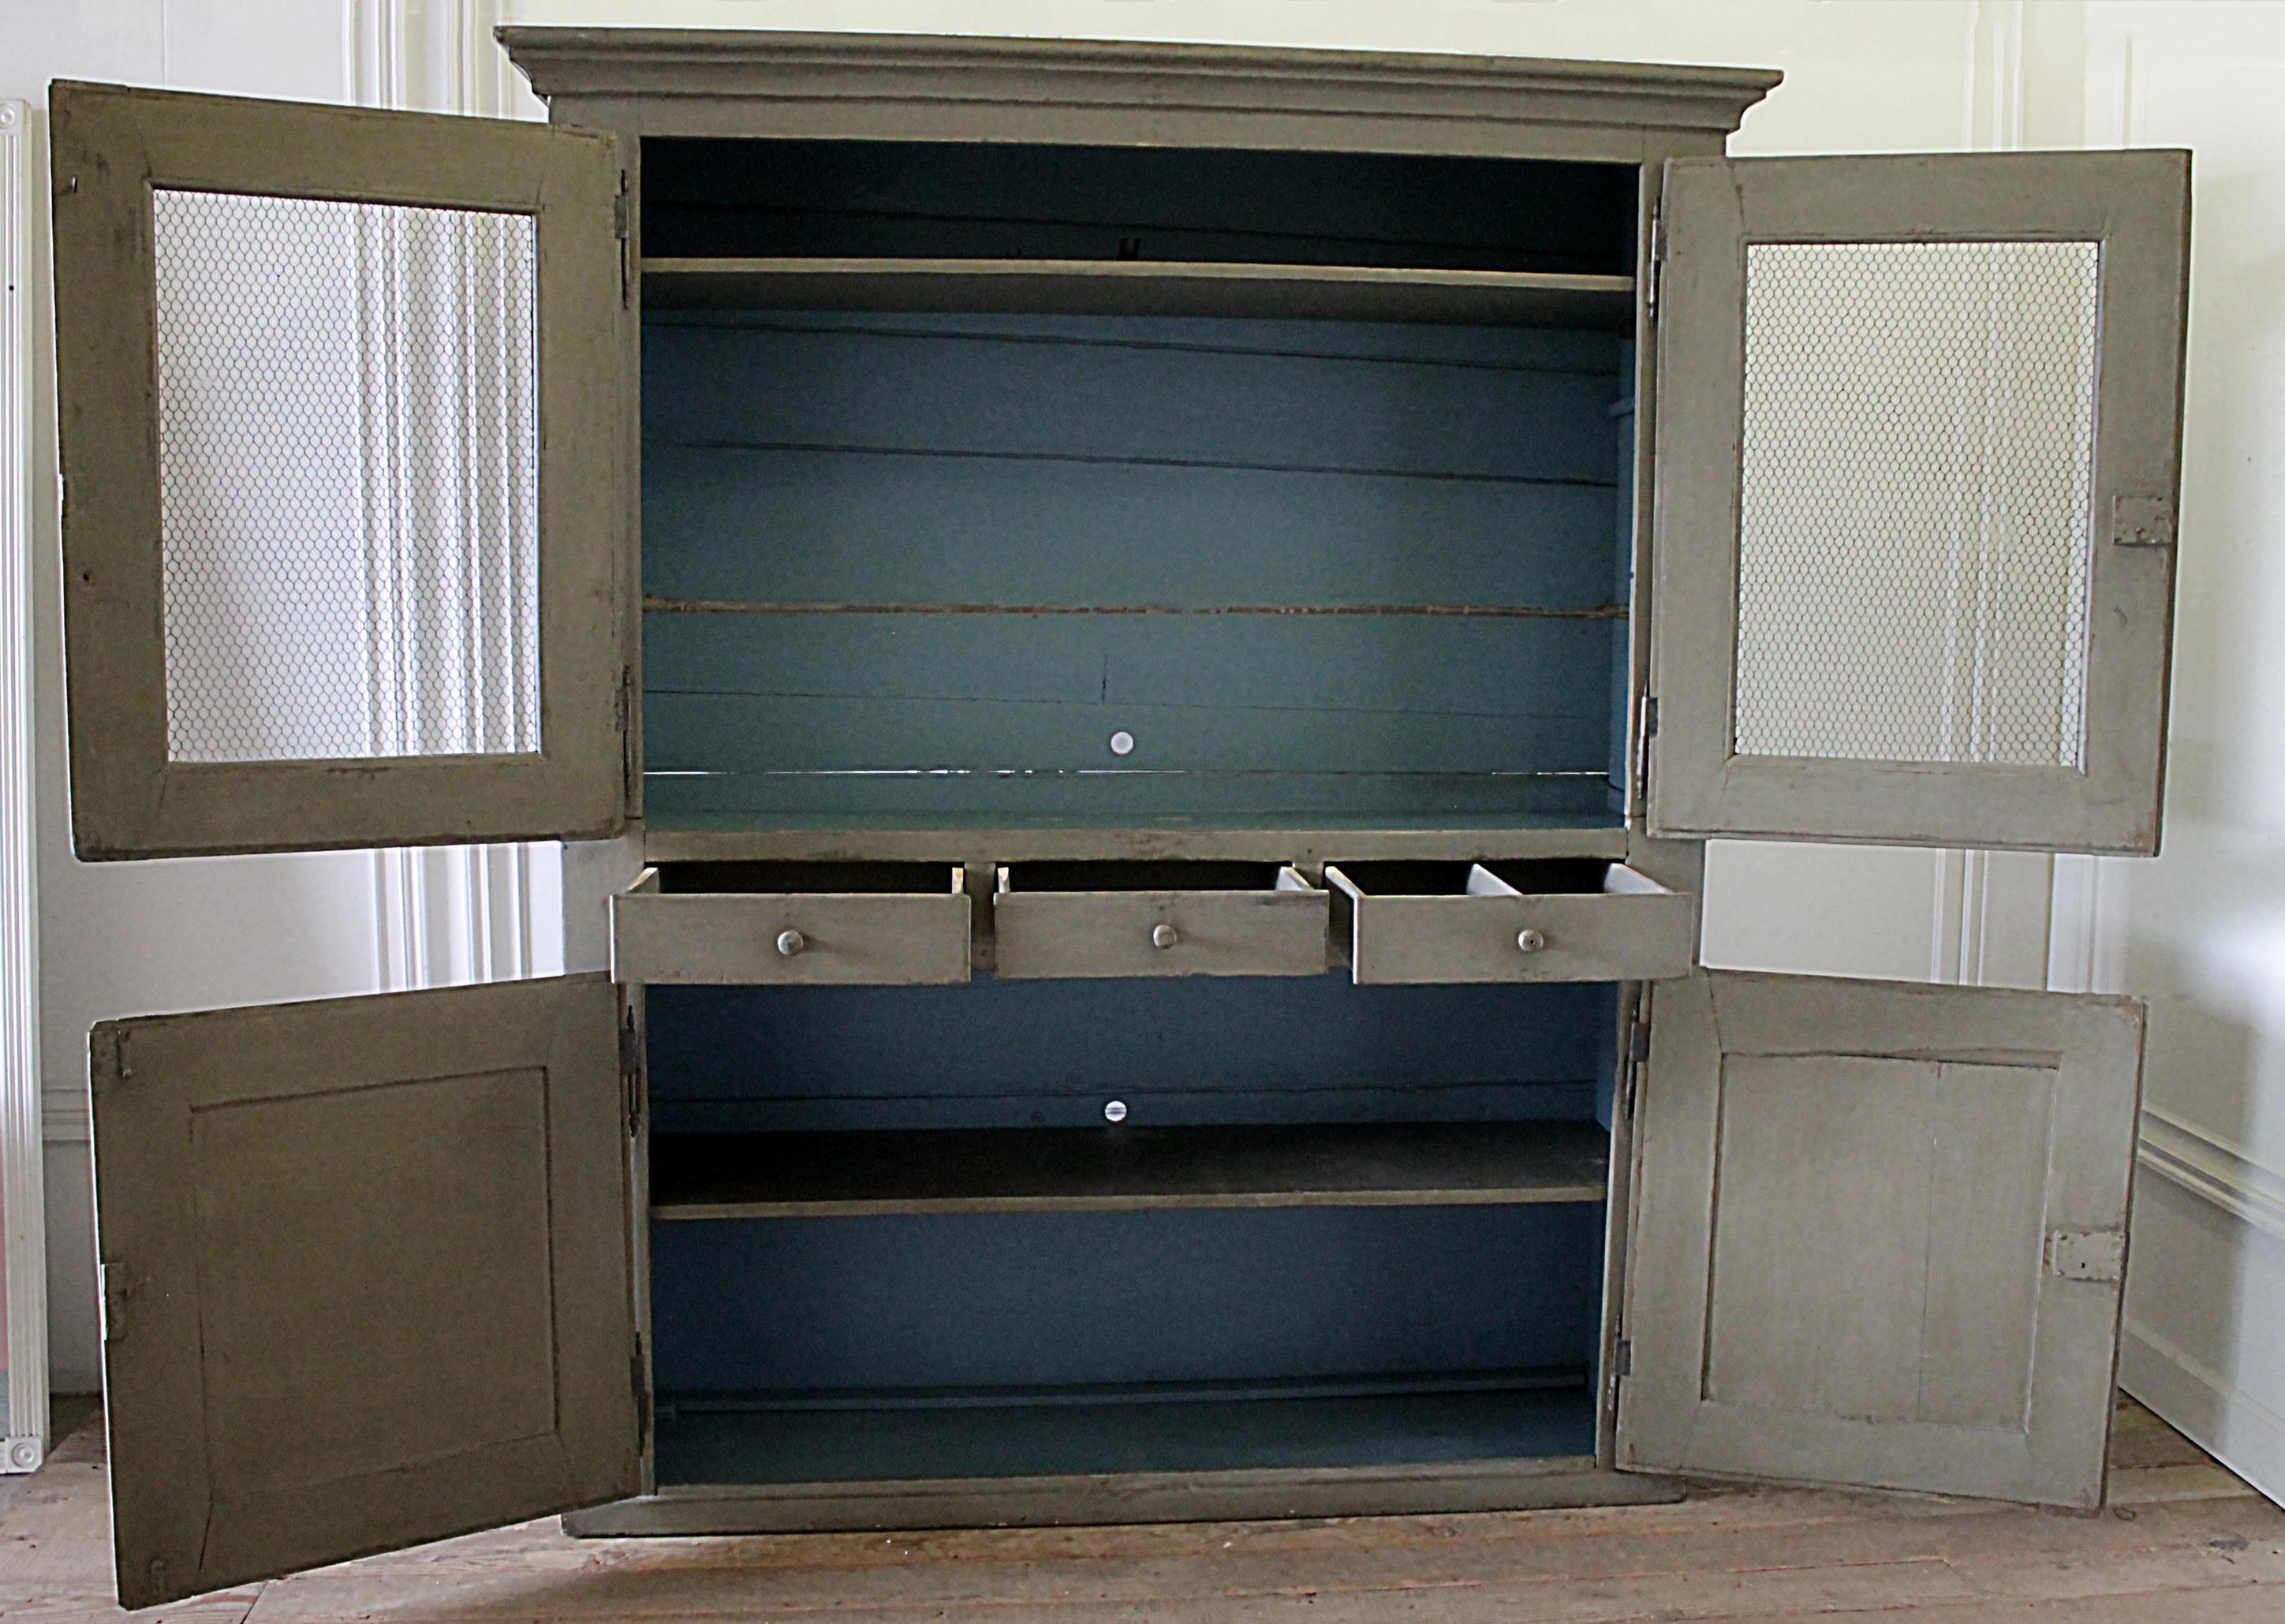 Early 20th century European farmhouse style cupboard
Painted in medium putty grey, with distressed finish, inside is a blue distressed finish, original as it came to us. This cabinet is perfect for many uses. It can hide a 55